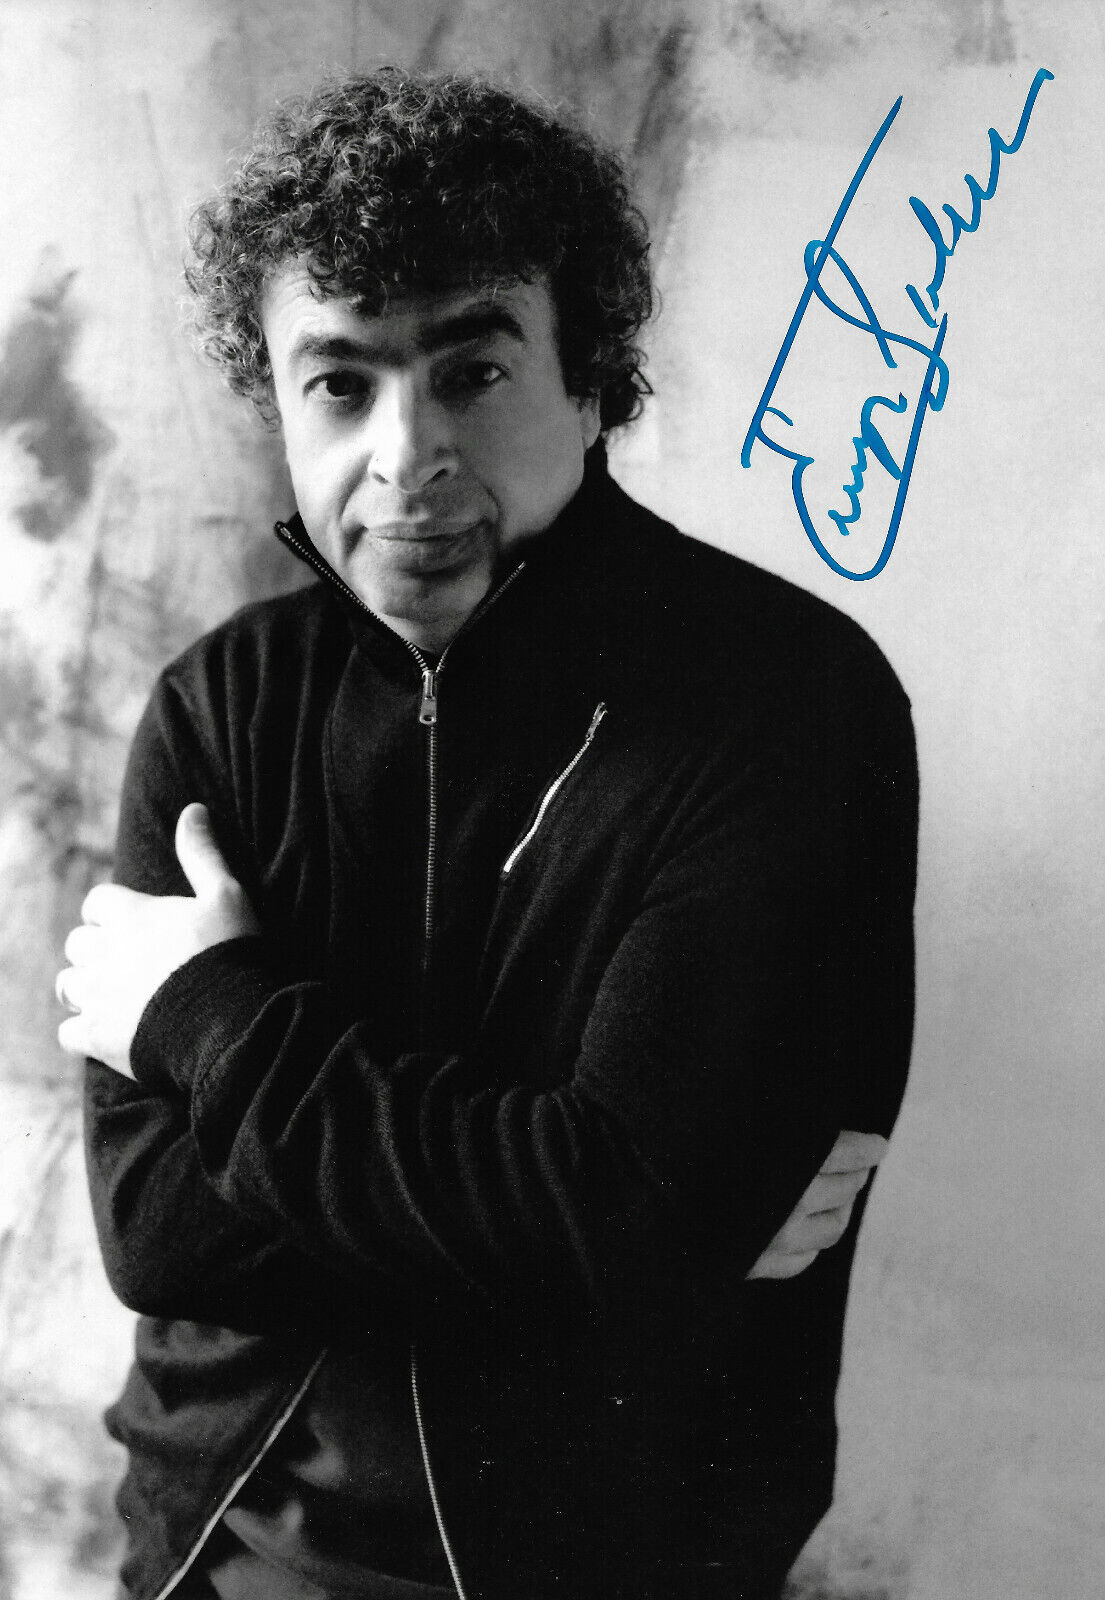 Semyon Bychkov Conductor signed 8x12 inch Photo Poster painting autograph